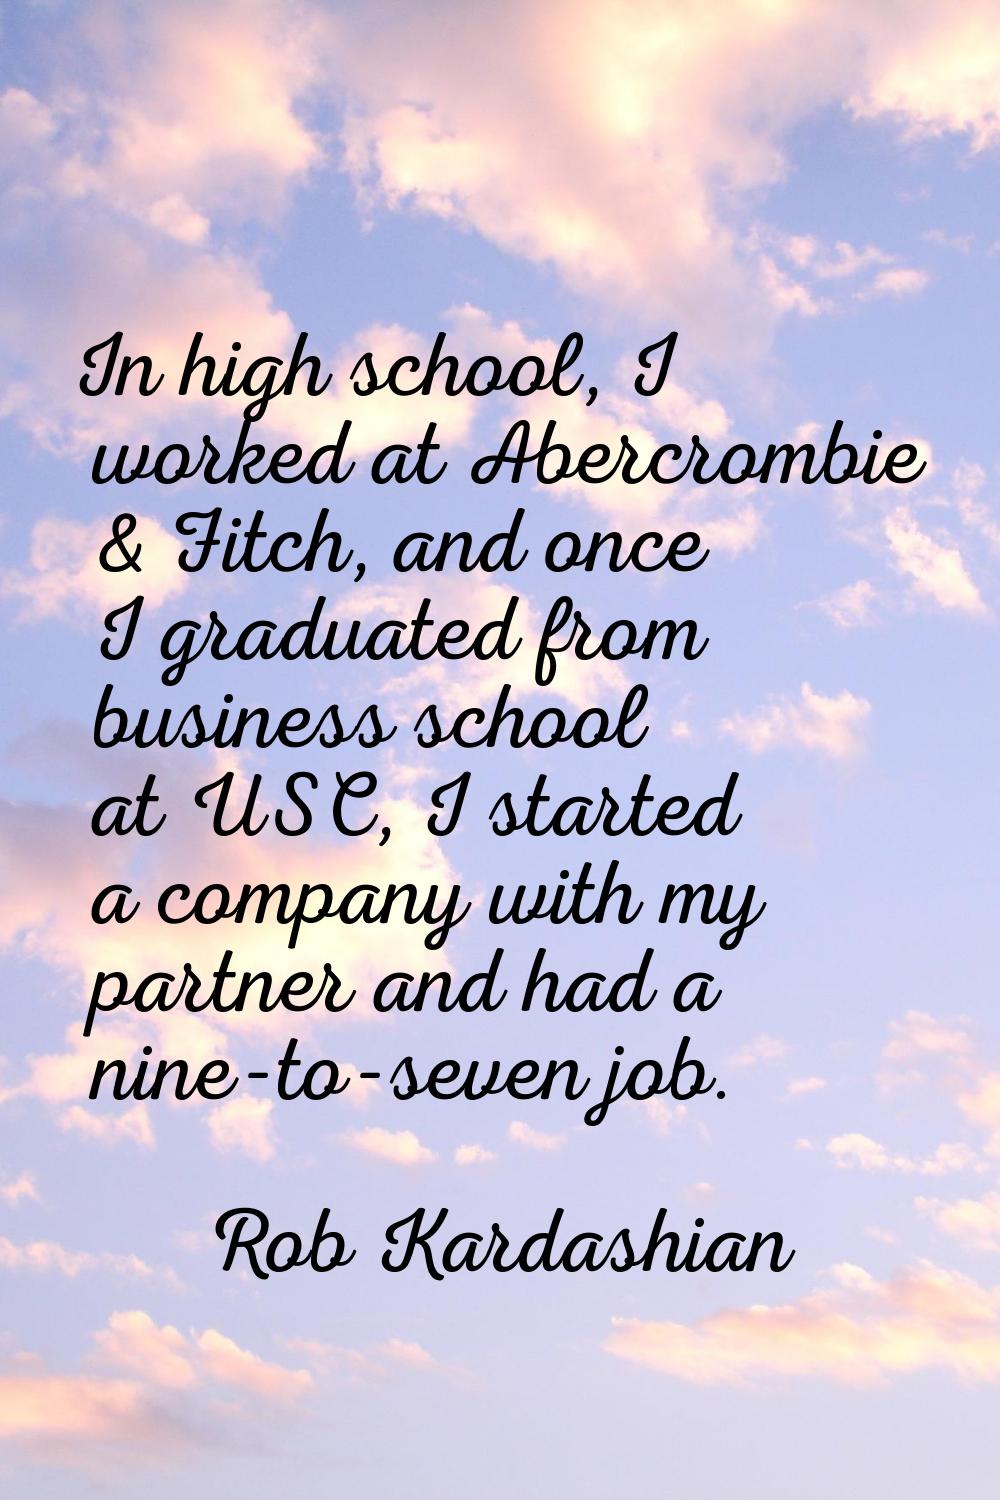 In high school, I worked at Abercrombie & Fitch, and once I graduated from business school at USC, 